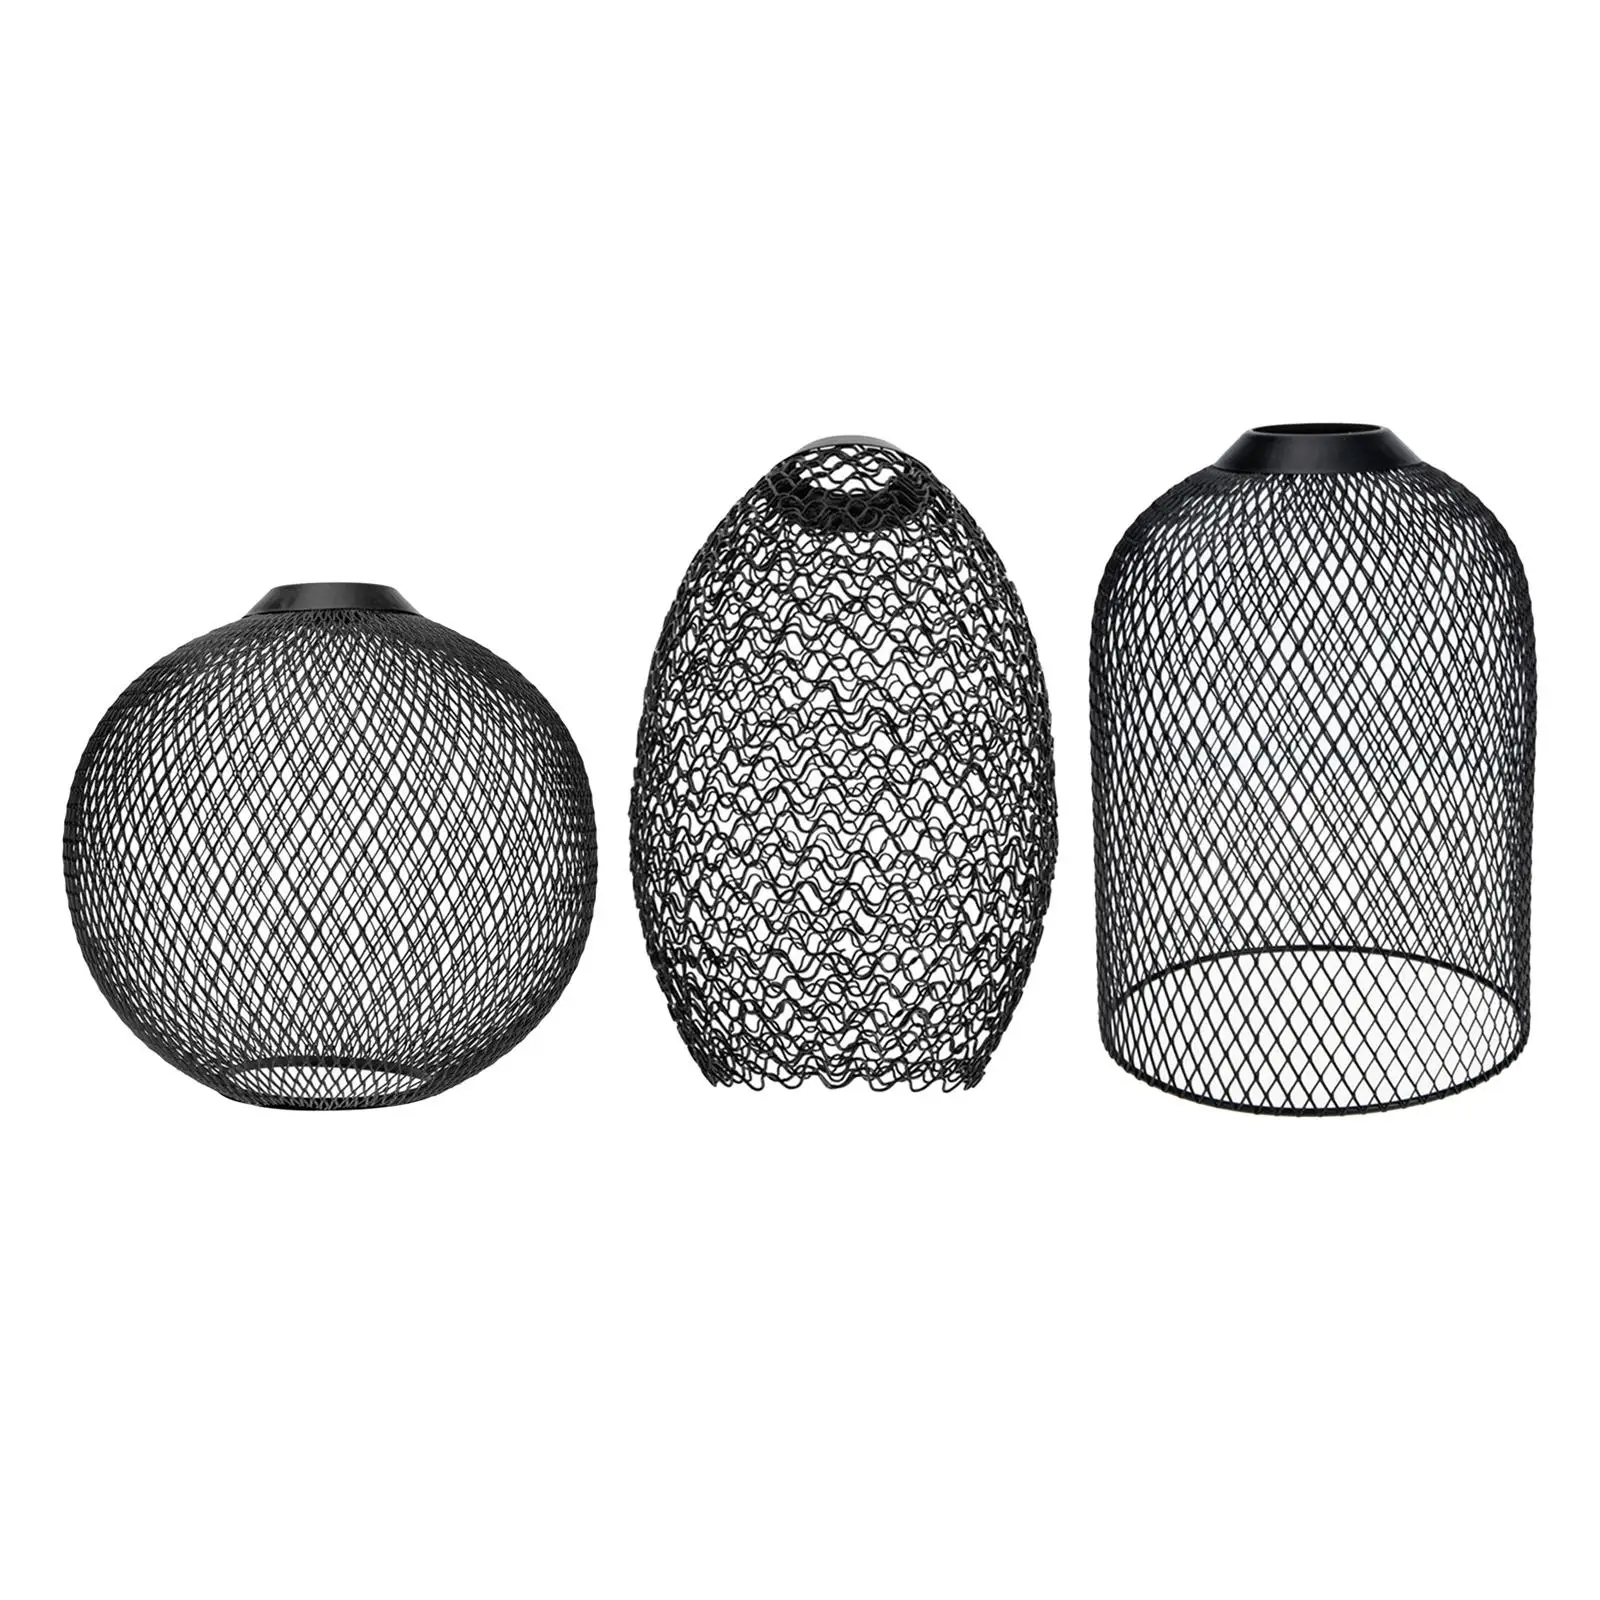 Metal Pendant Lamp Shade Chandelier Wrought Iron Wire Lampshade for Kitchen Island, Cafe